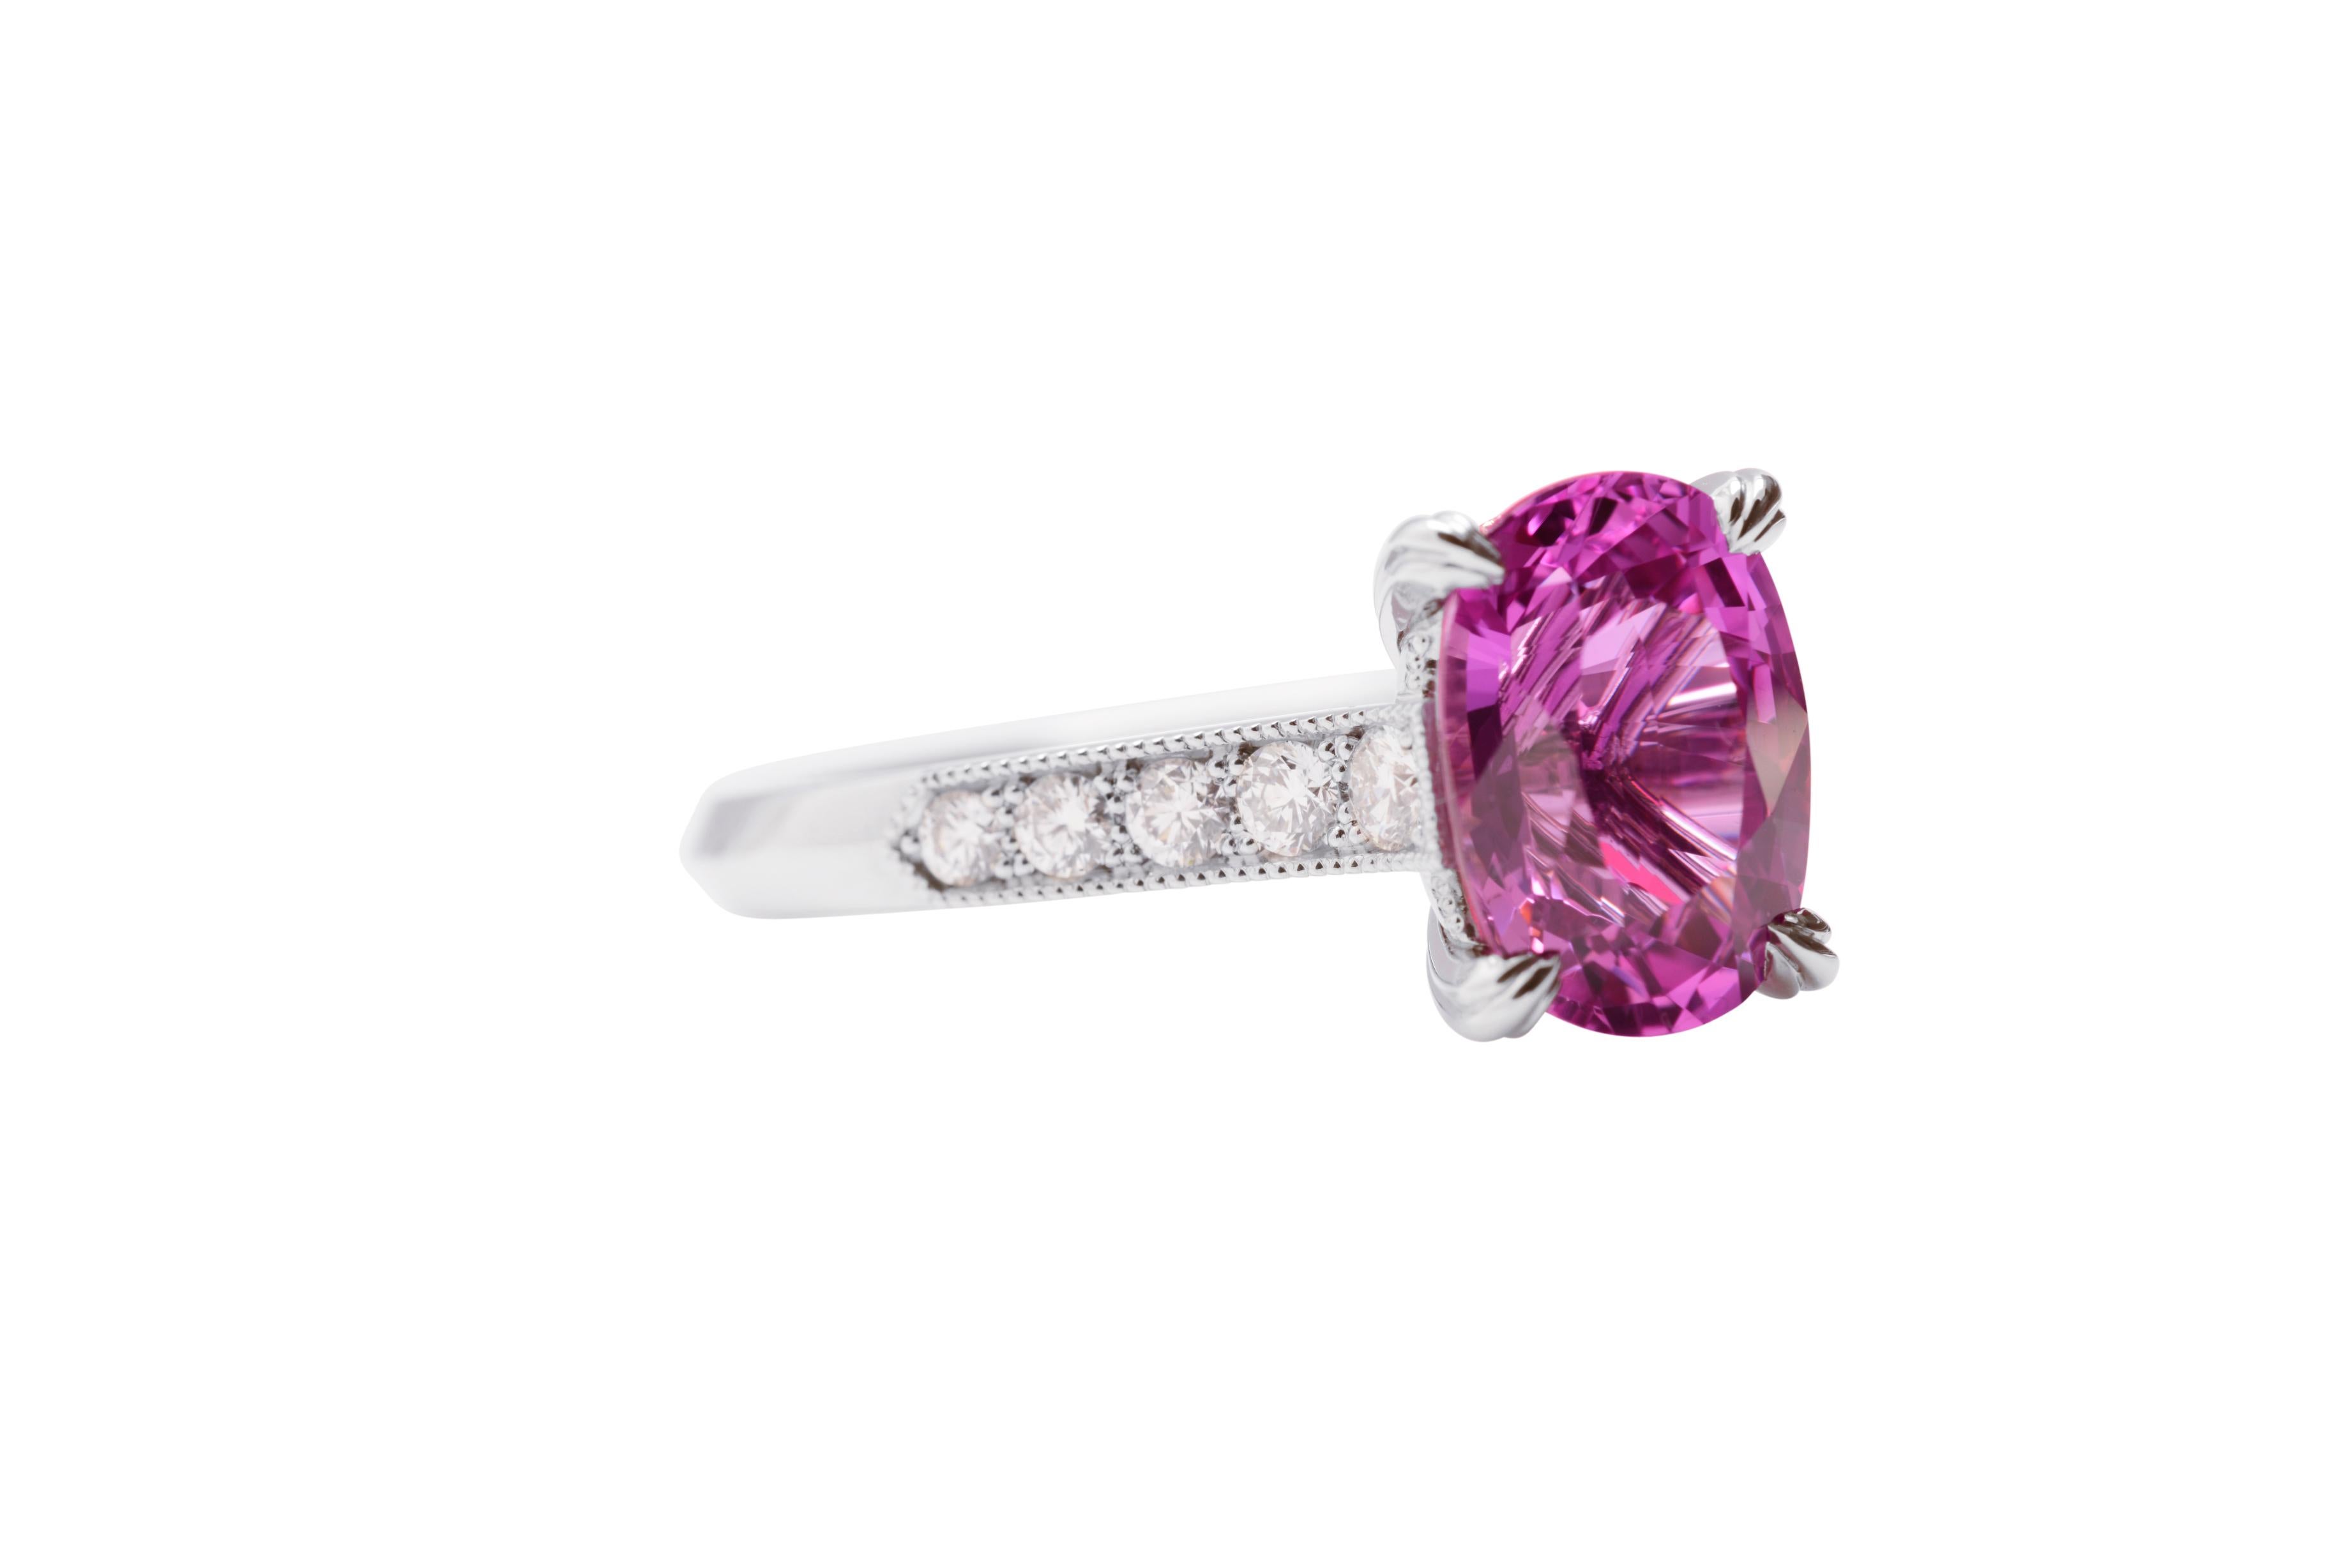 In Nicky Burles signature solitaire design is a 4.0 carat intense pink oval cut sapphire. Handcrafted in platinum the centre setting has four fine triple wire claws, the band softly up swept and detailed with graduating brilliant cut diamonds that